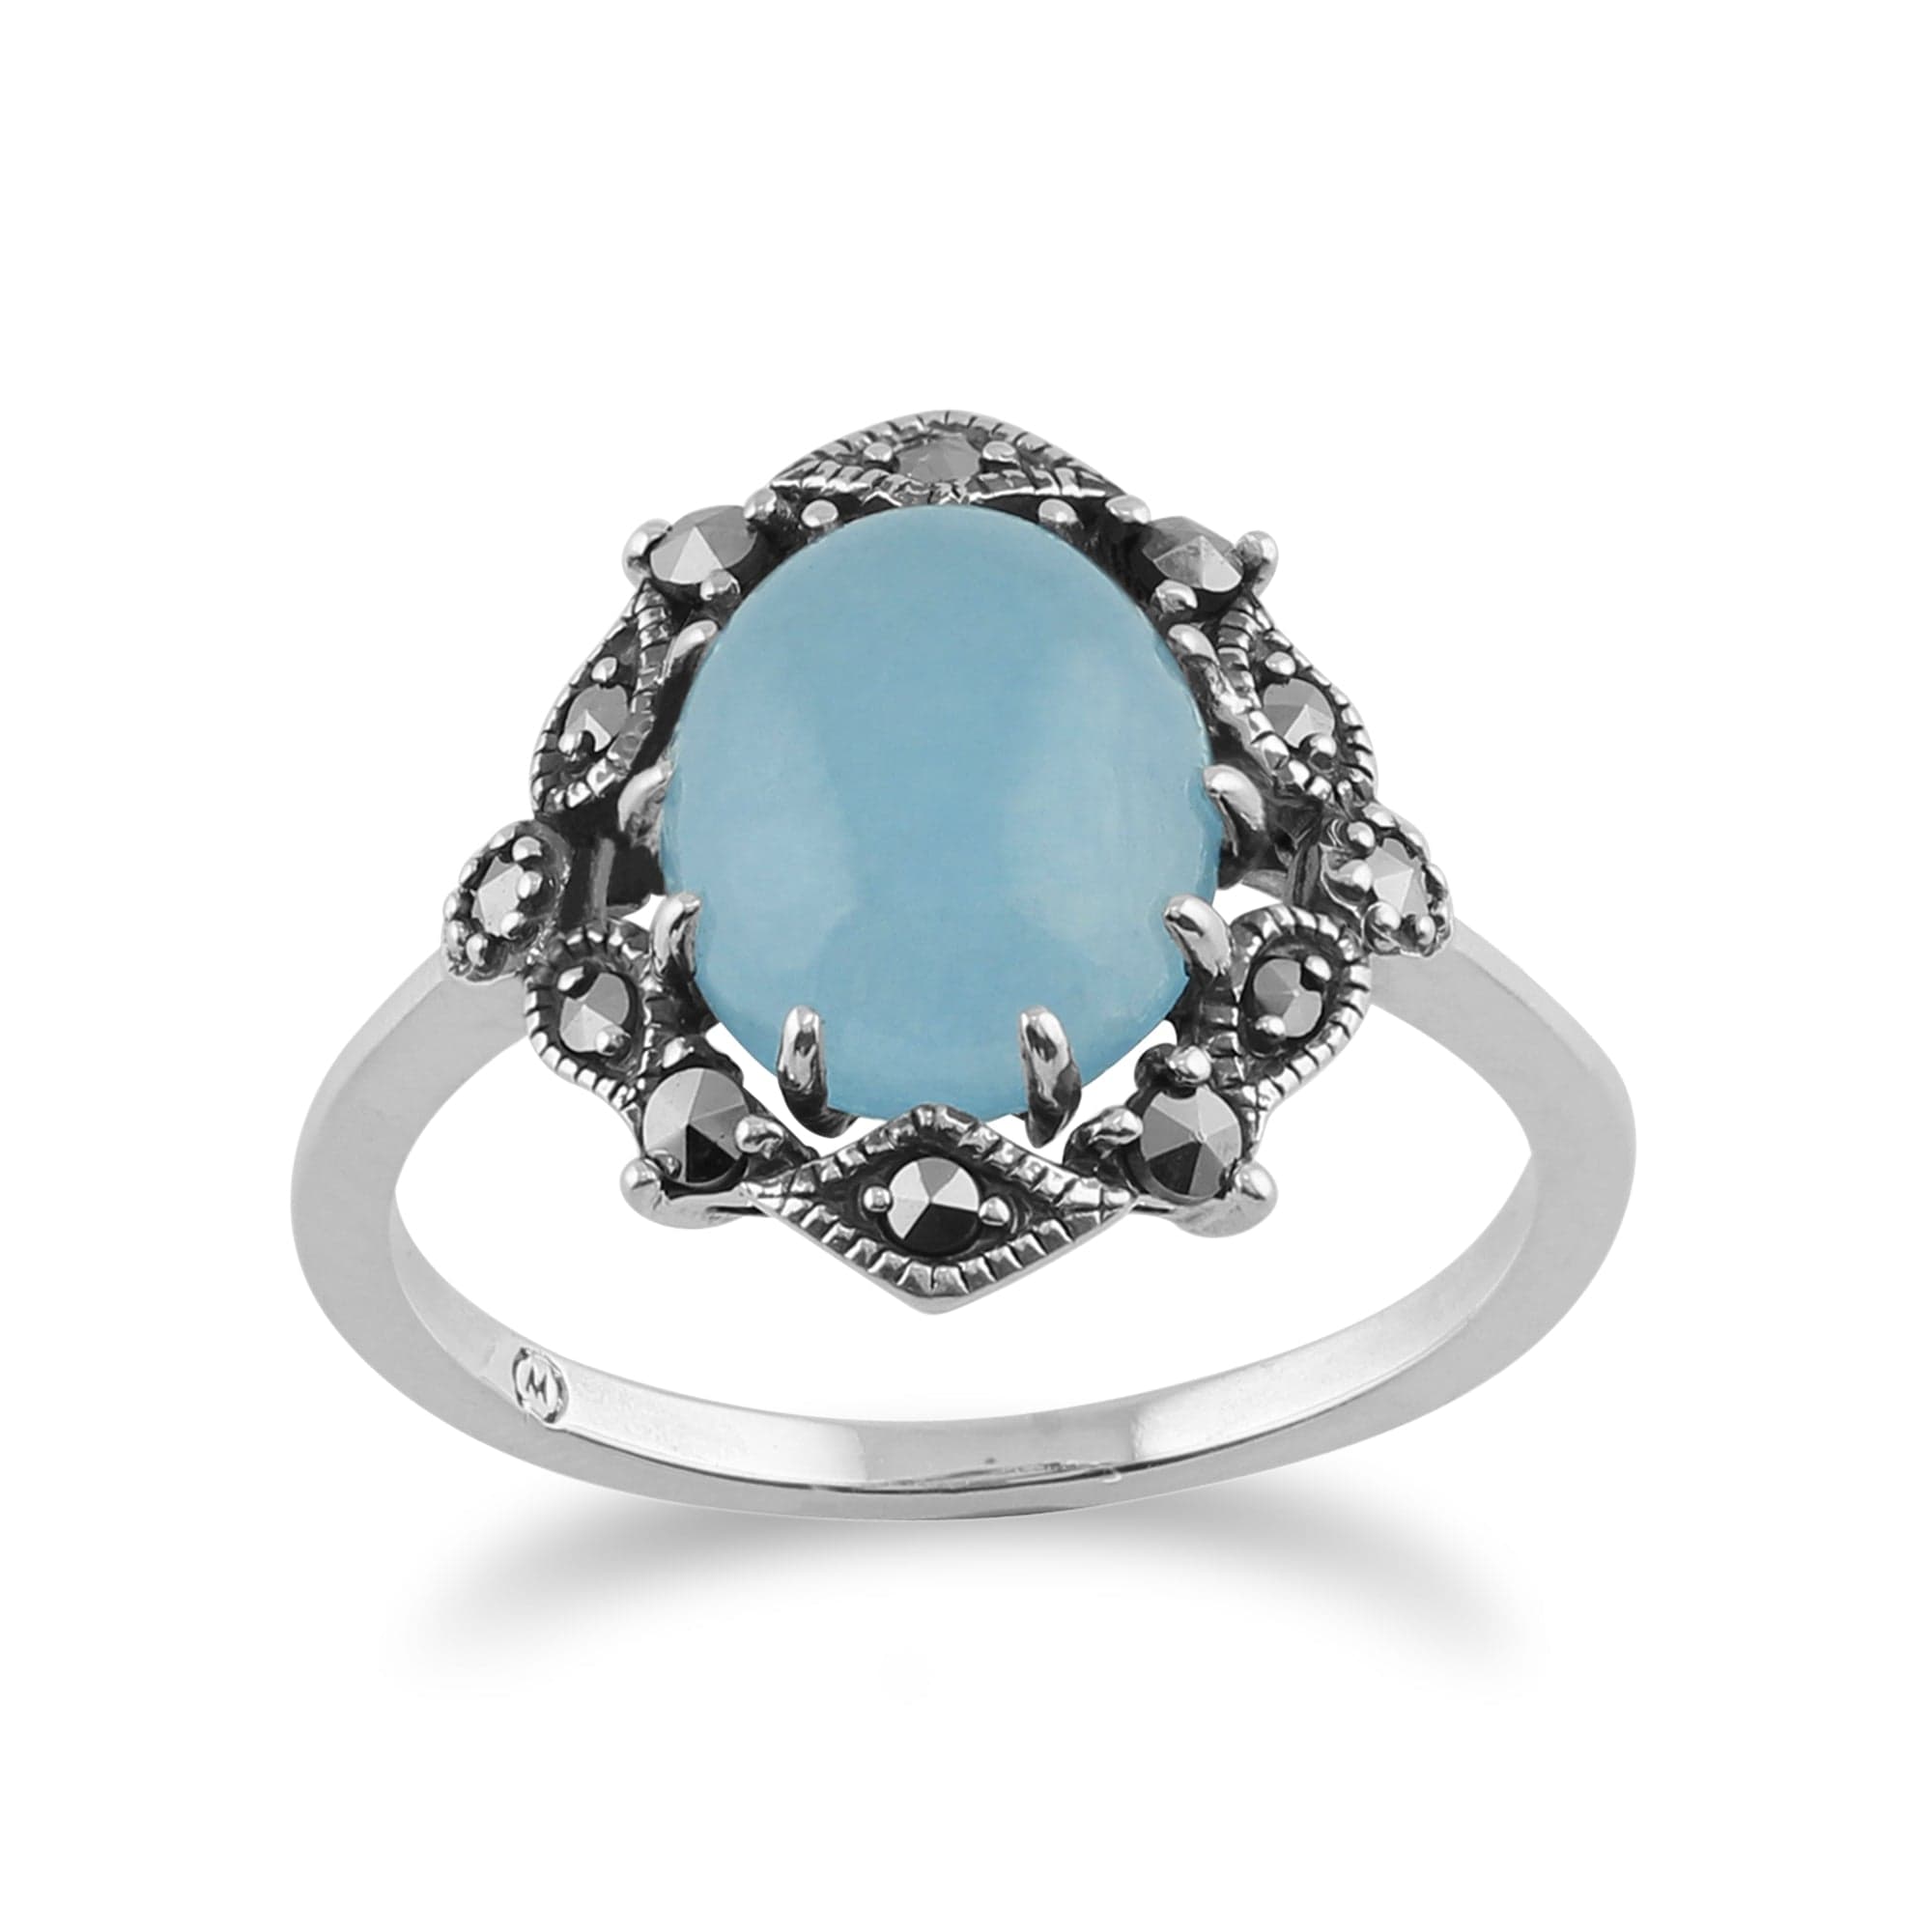 Art Nouveau Style Oval Blue Jade Cabochon & Marcasite Statement Ring in 925 Sterling Silver - Gemondo